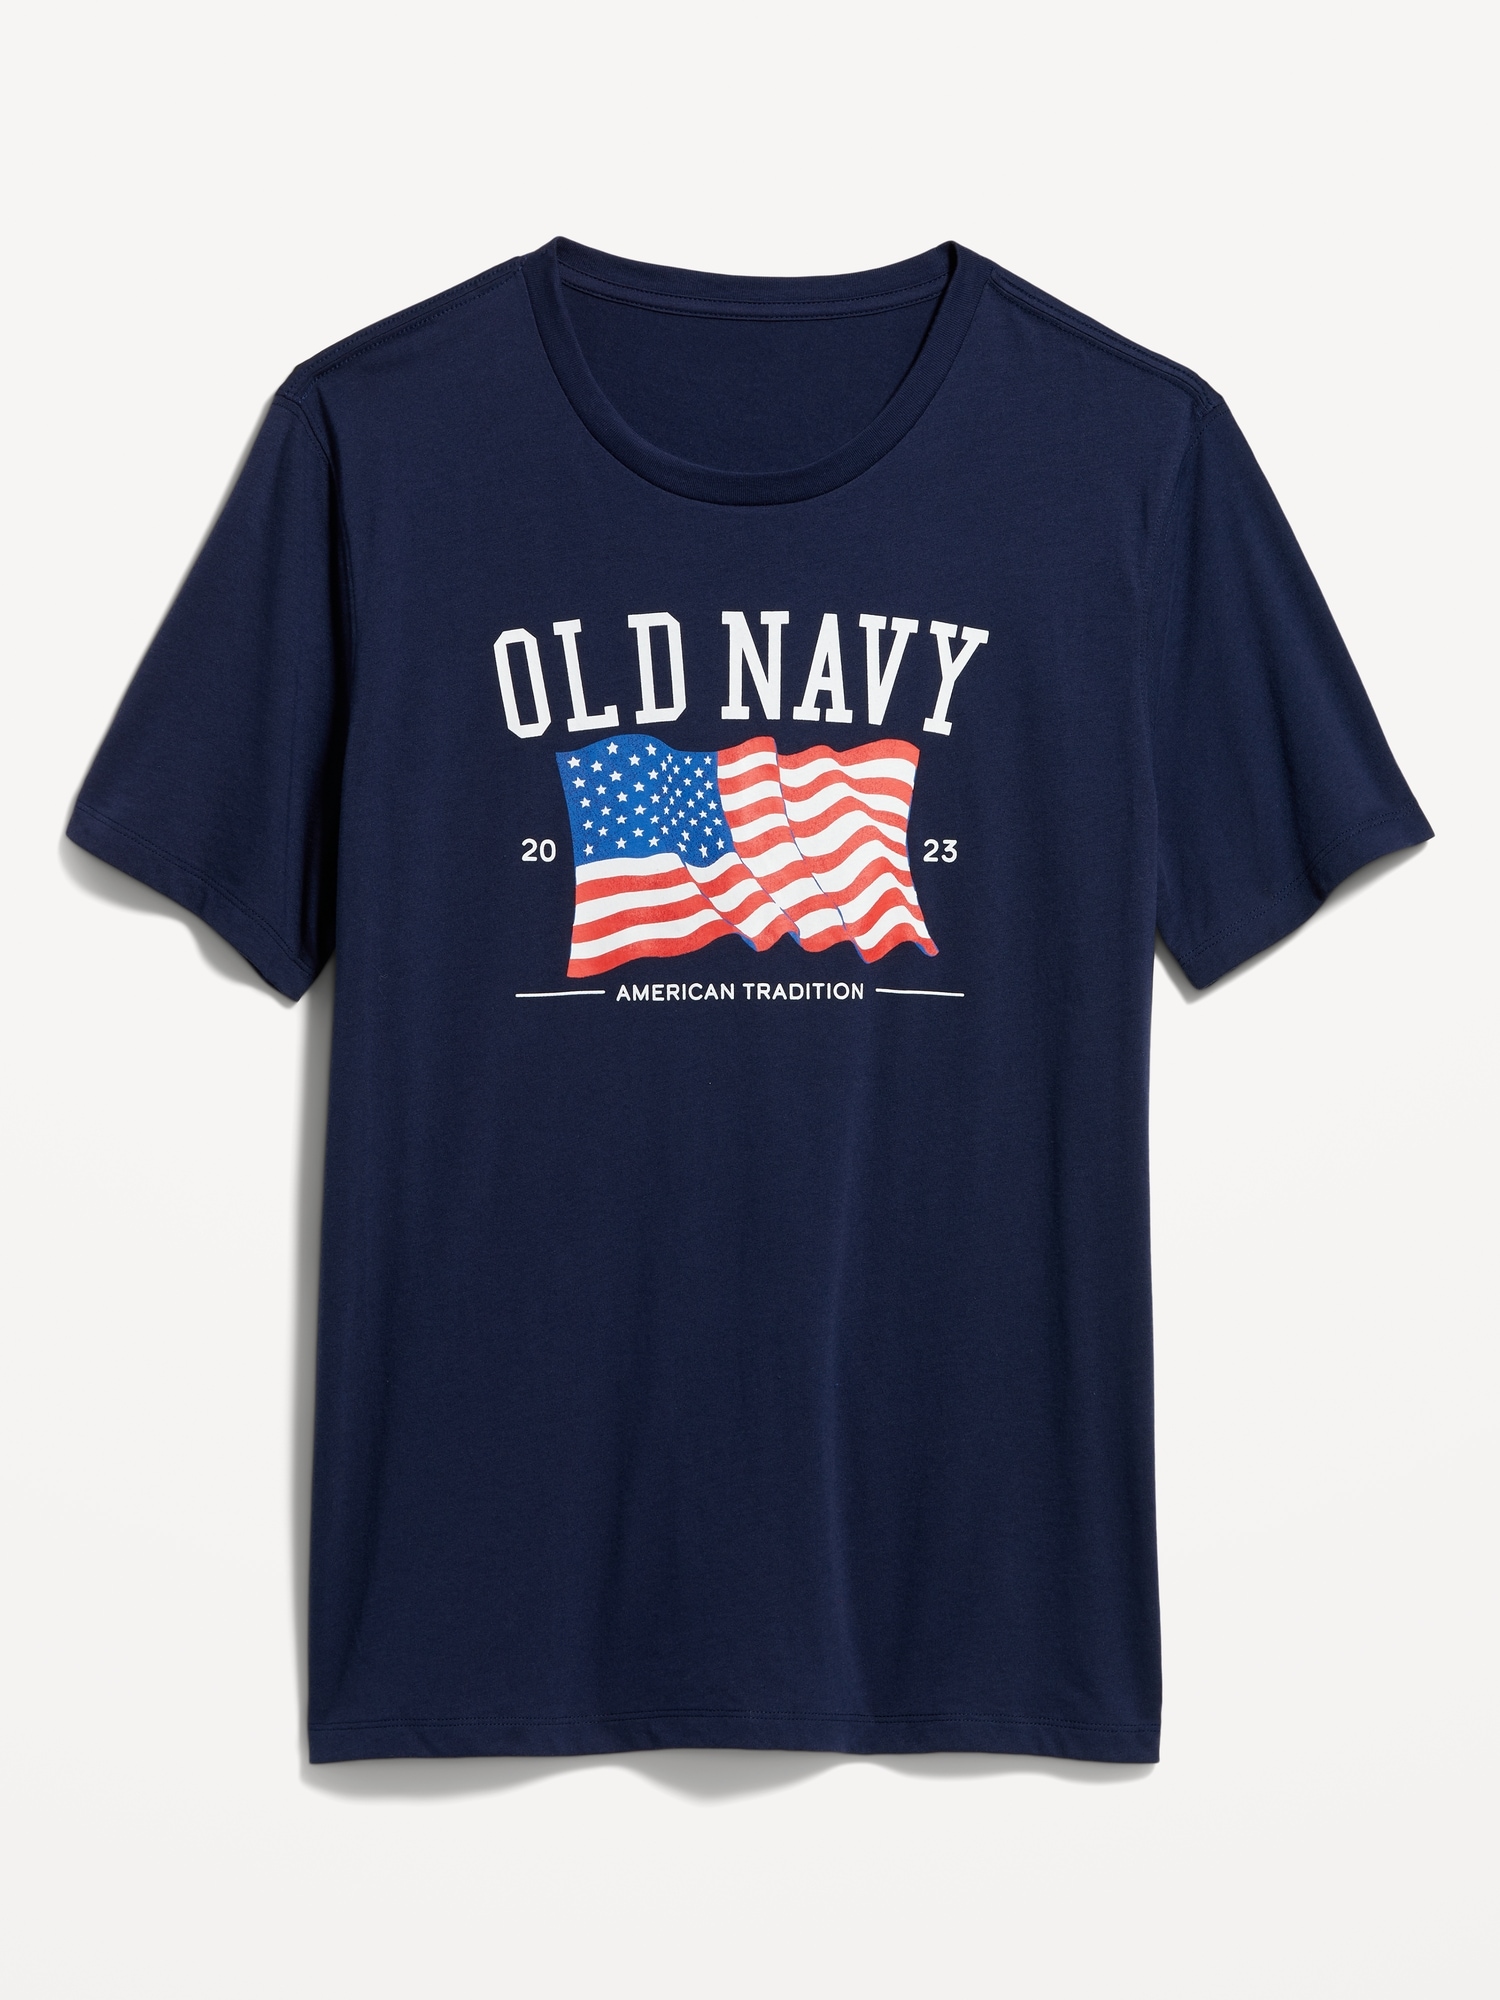 Old Navy Matching "Old Navy" Flag Graphic T-Shirt for Men blue. 1